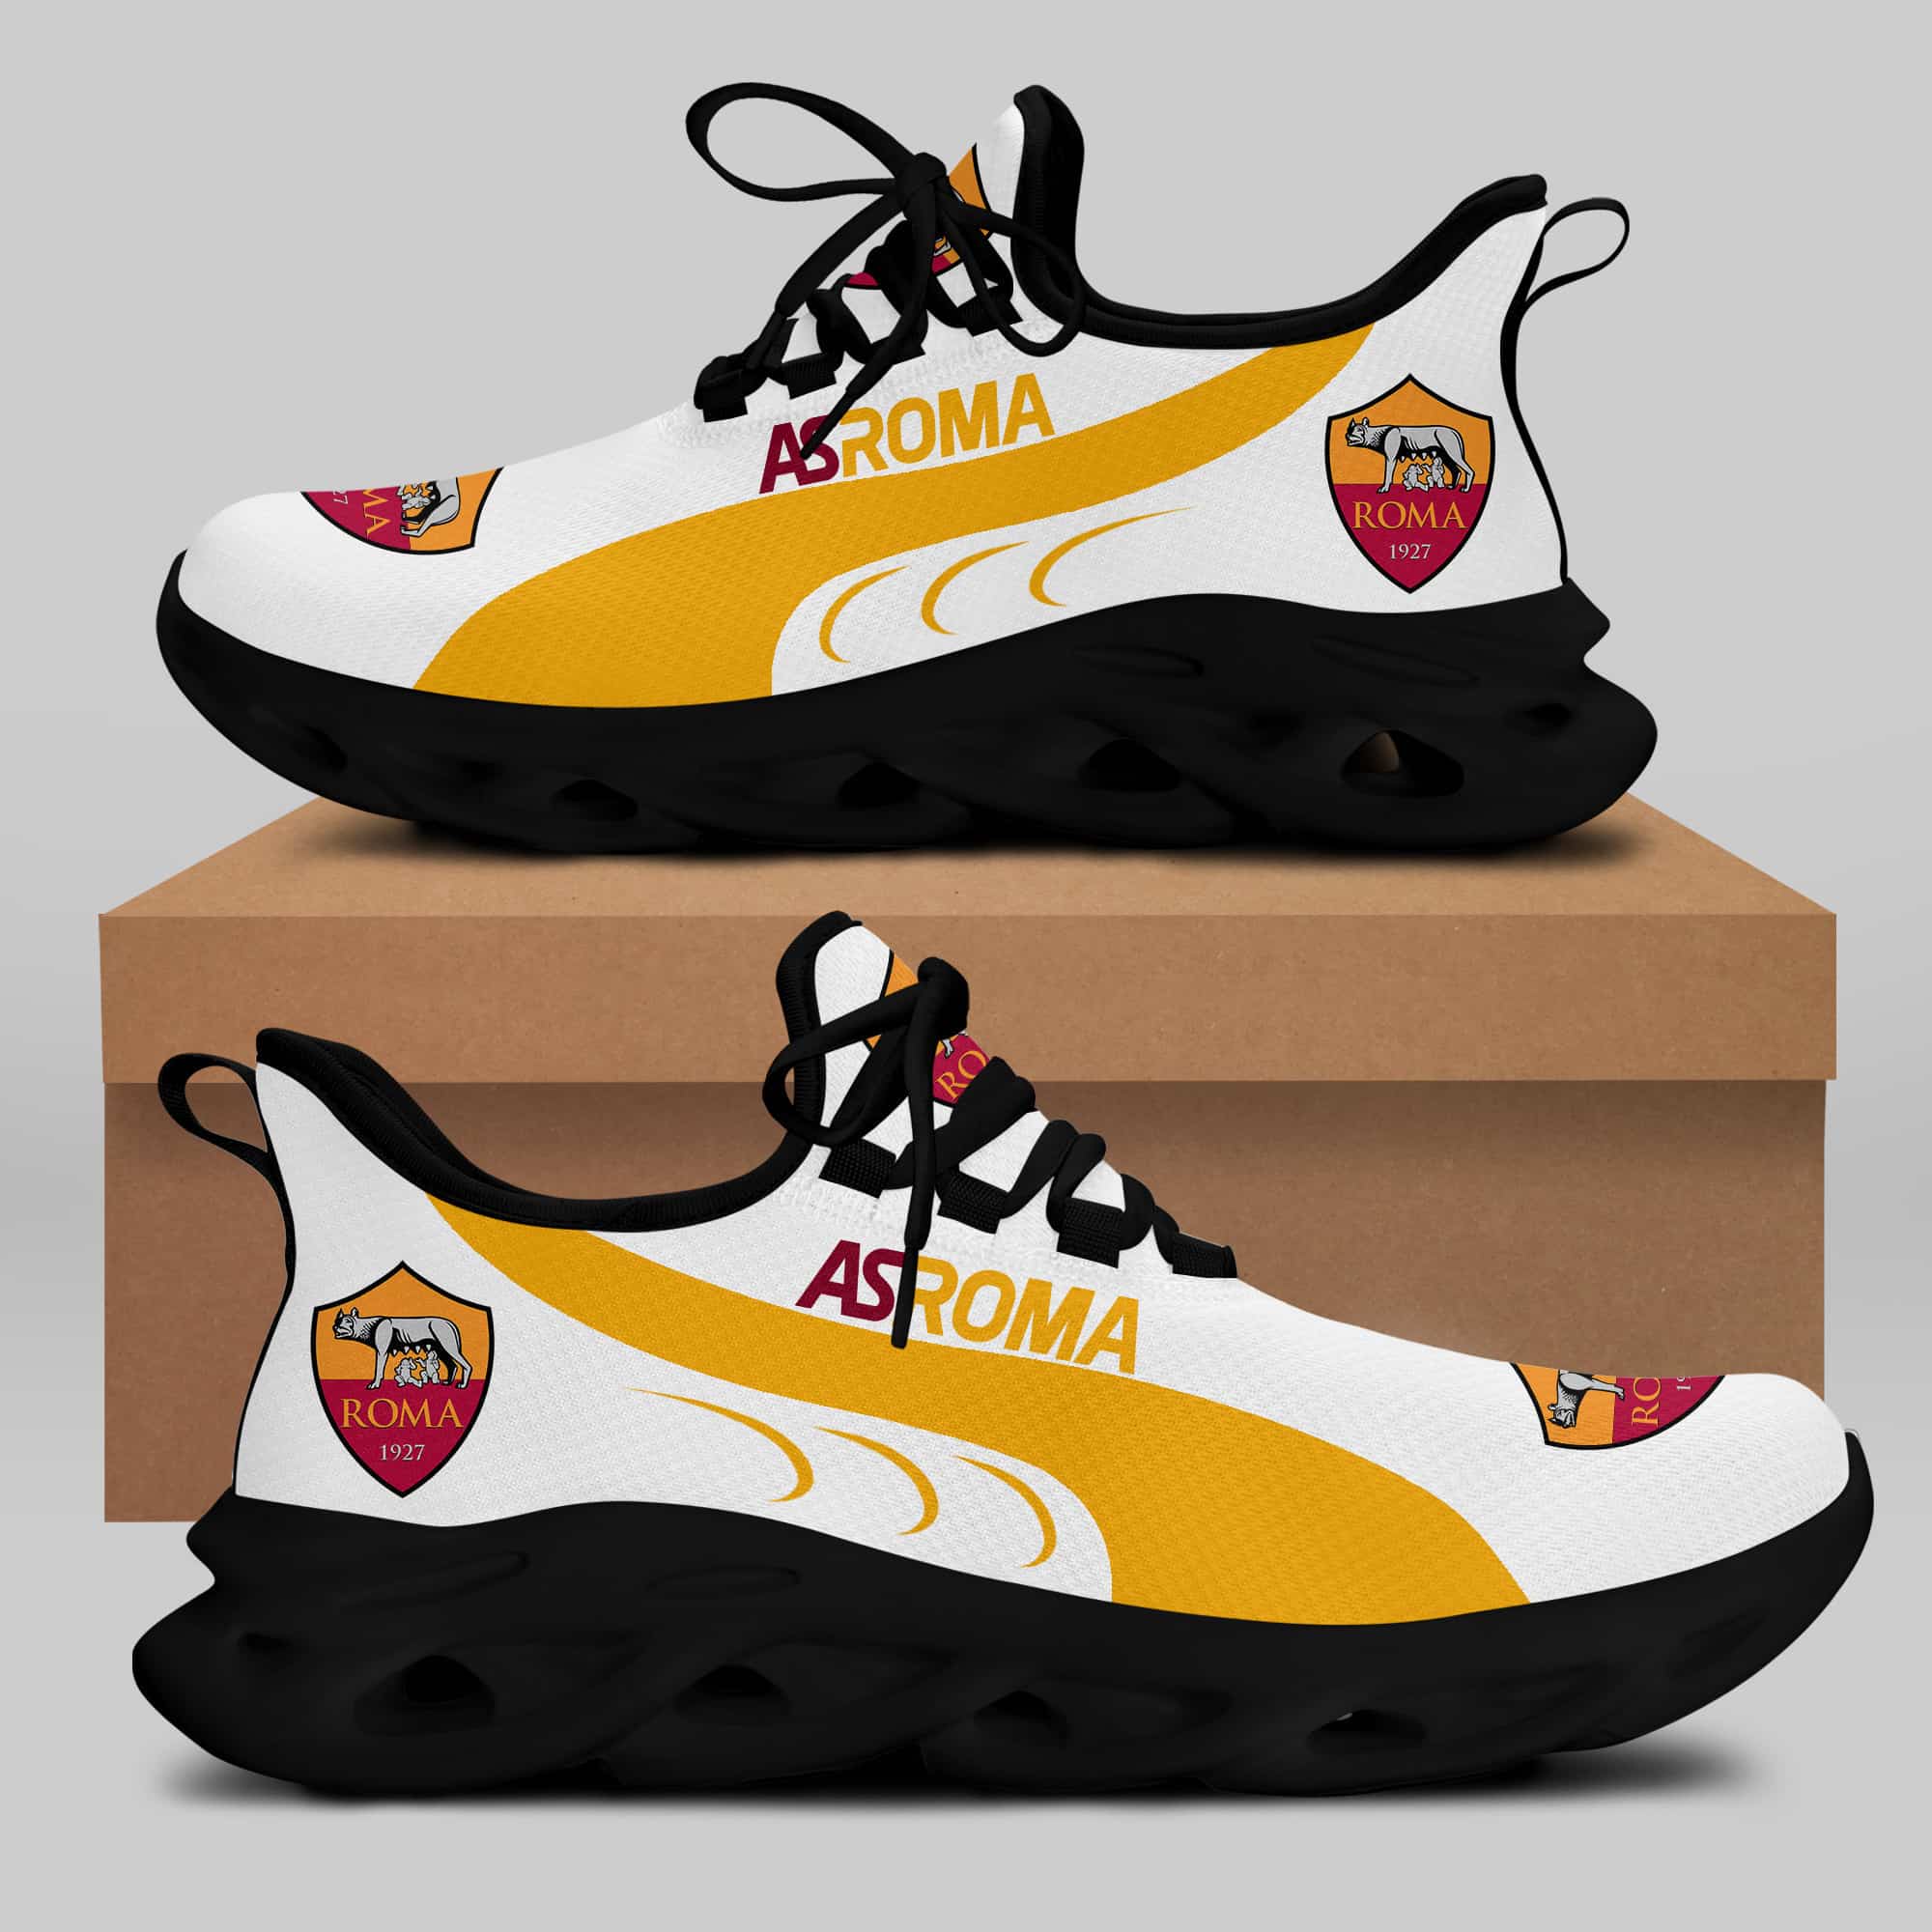 As Roma Running Shoes Max Soul Shoes Sneakers Ver 18 2